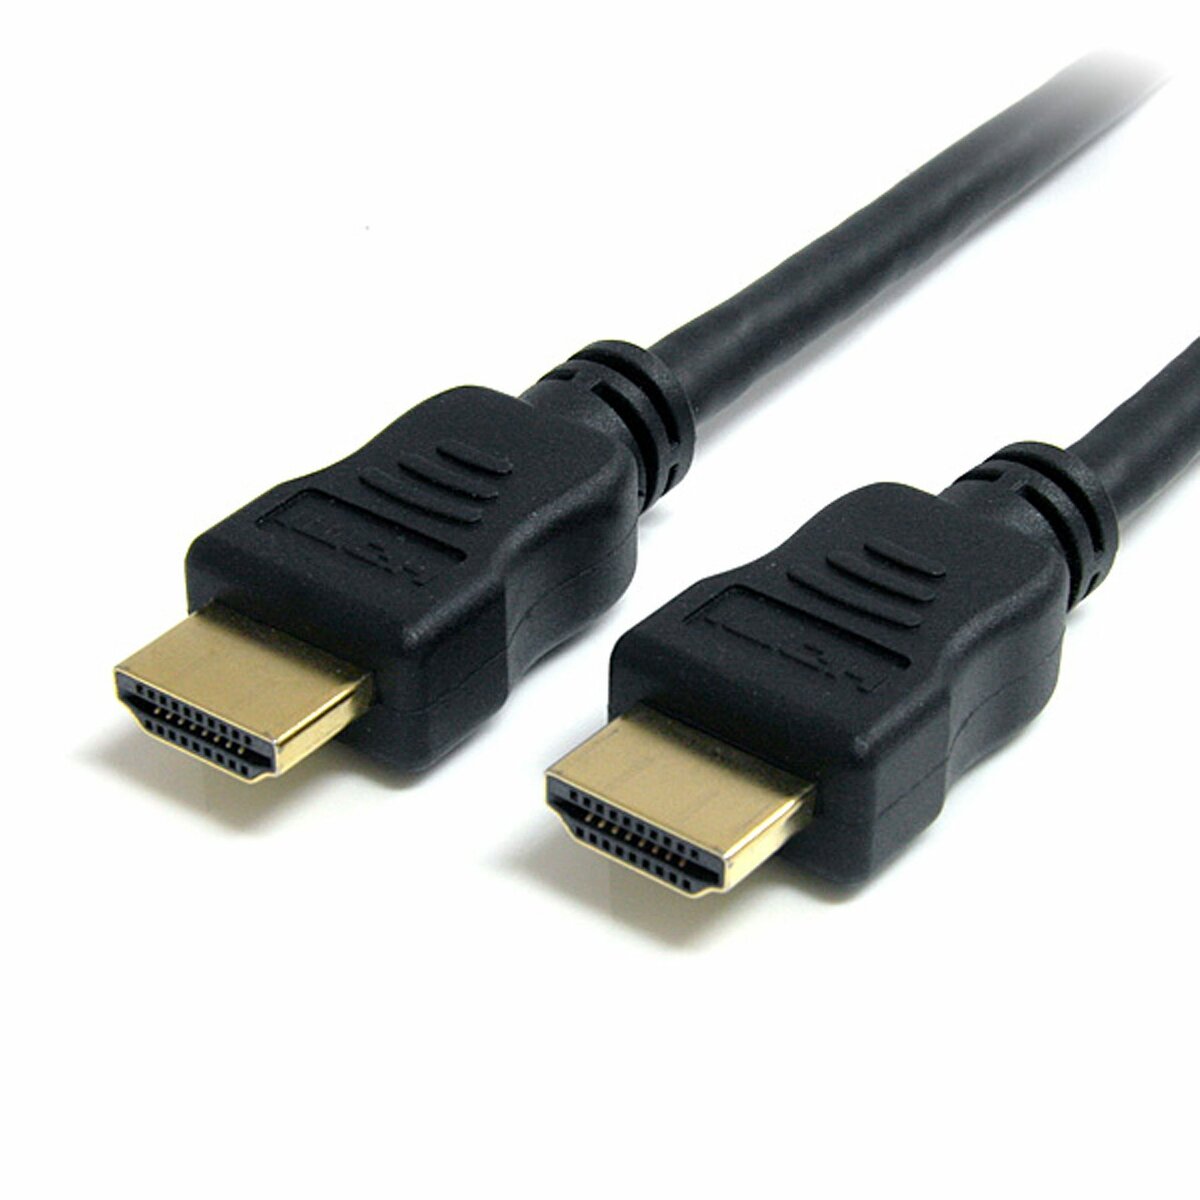 High Speed Cable Mini HDMI to HDMI Male / Male 1.8m Black - HDMI Cables -  Multimedia Cables - Cables and Sockets